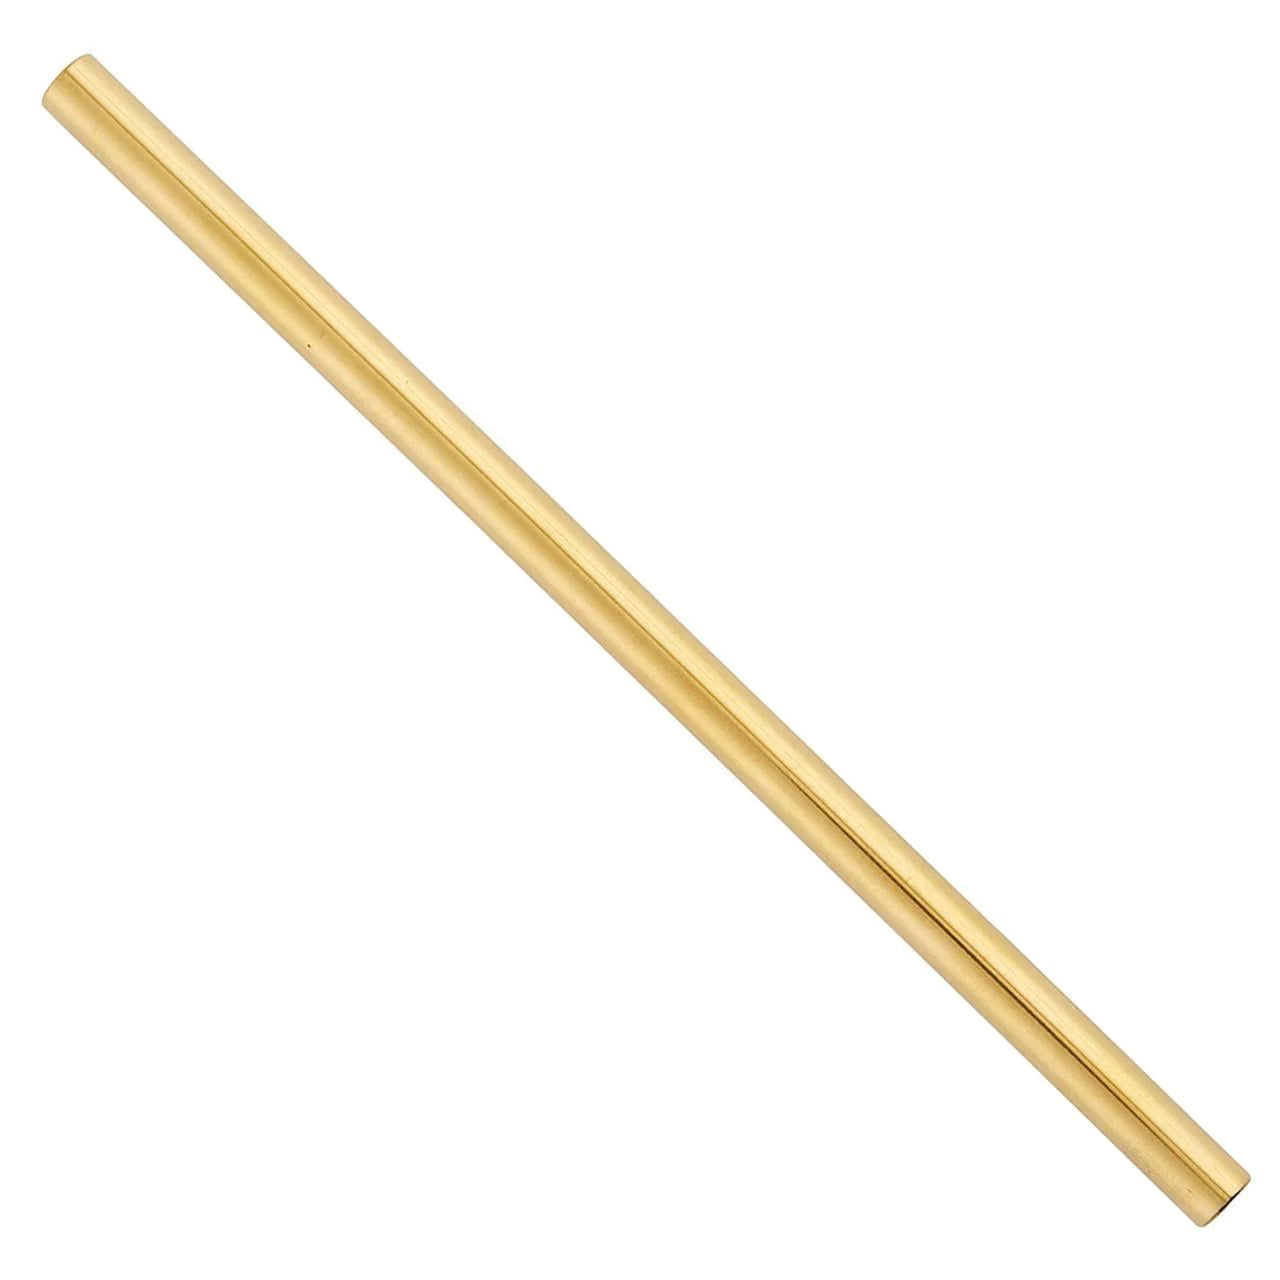 5" Mini Stainless Steel Cocktail Straws in Gold | Set of 4 by The Bullish Store